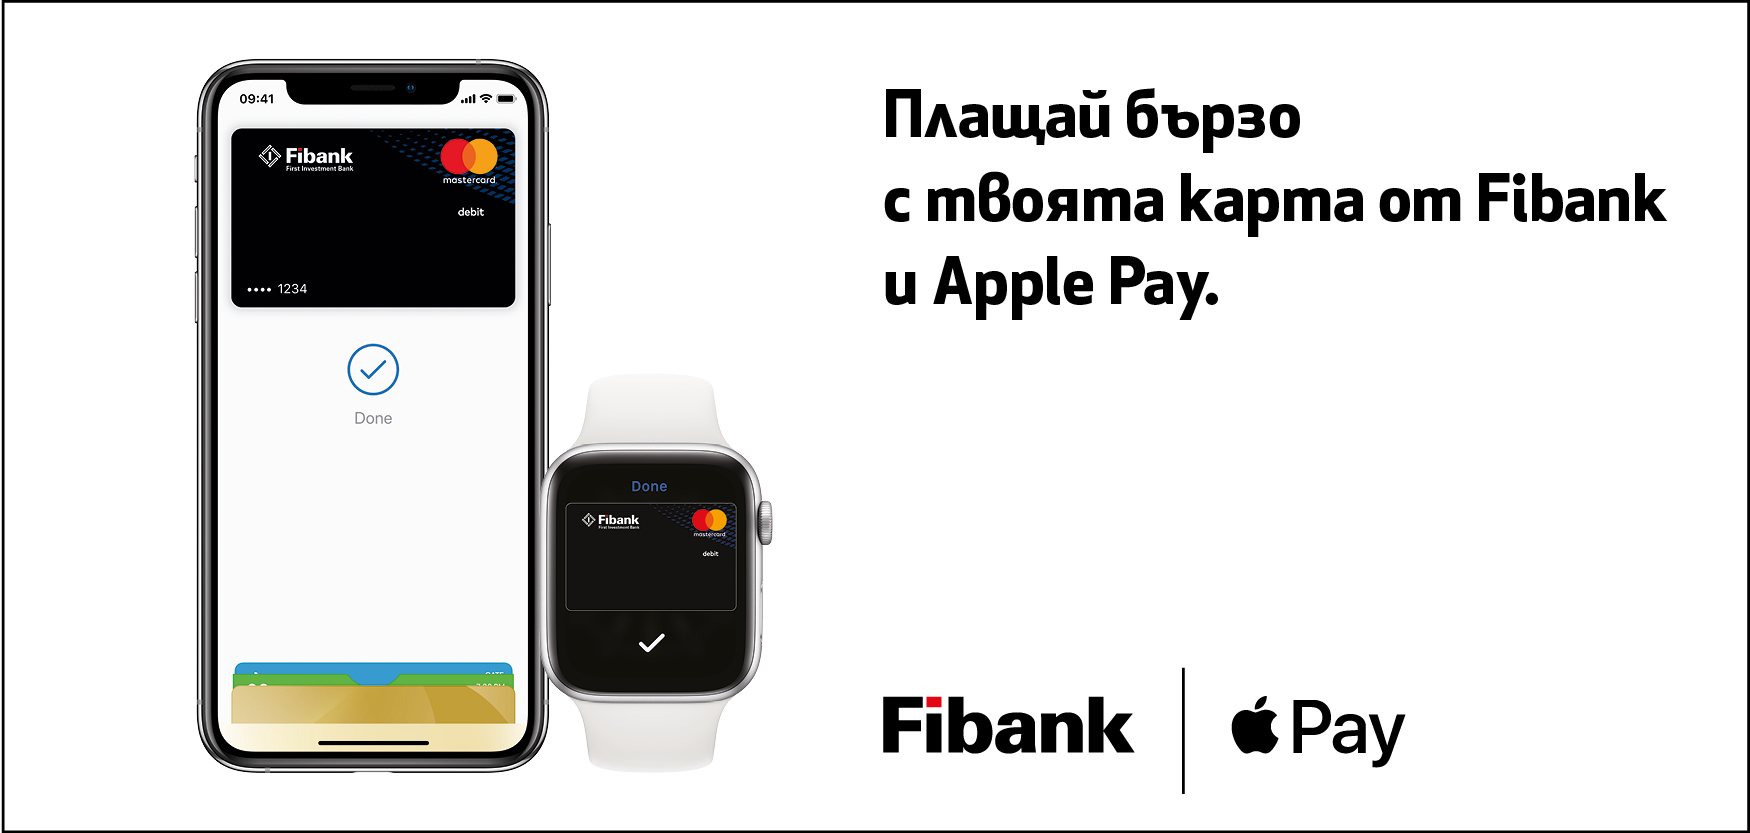 Apple Pay and Fibank